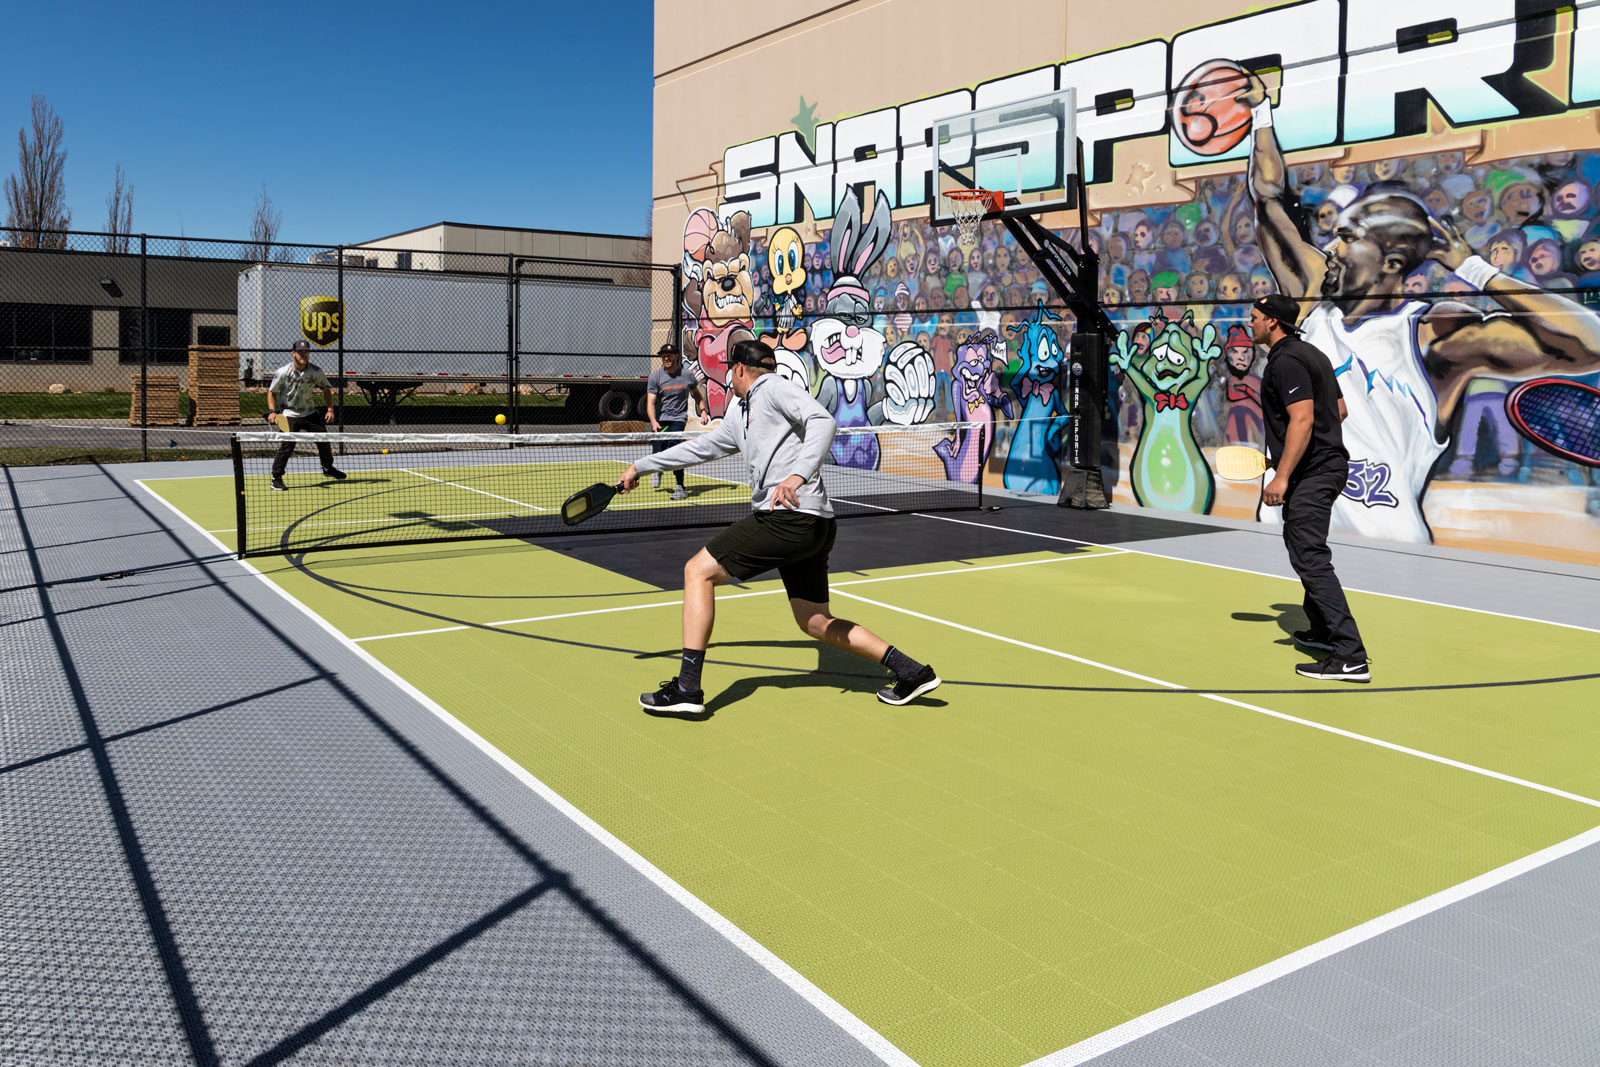 Pickleball players continue their game on the Outdoor Revolution PS Pickleball Surfacing